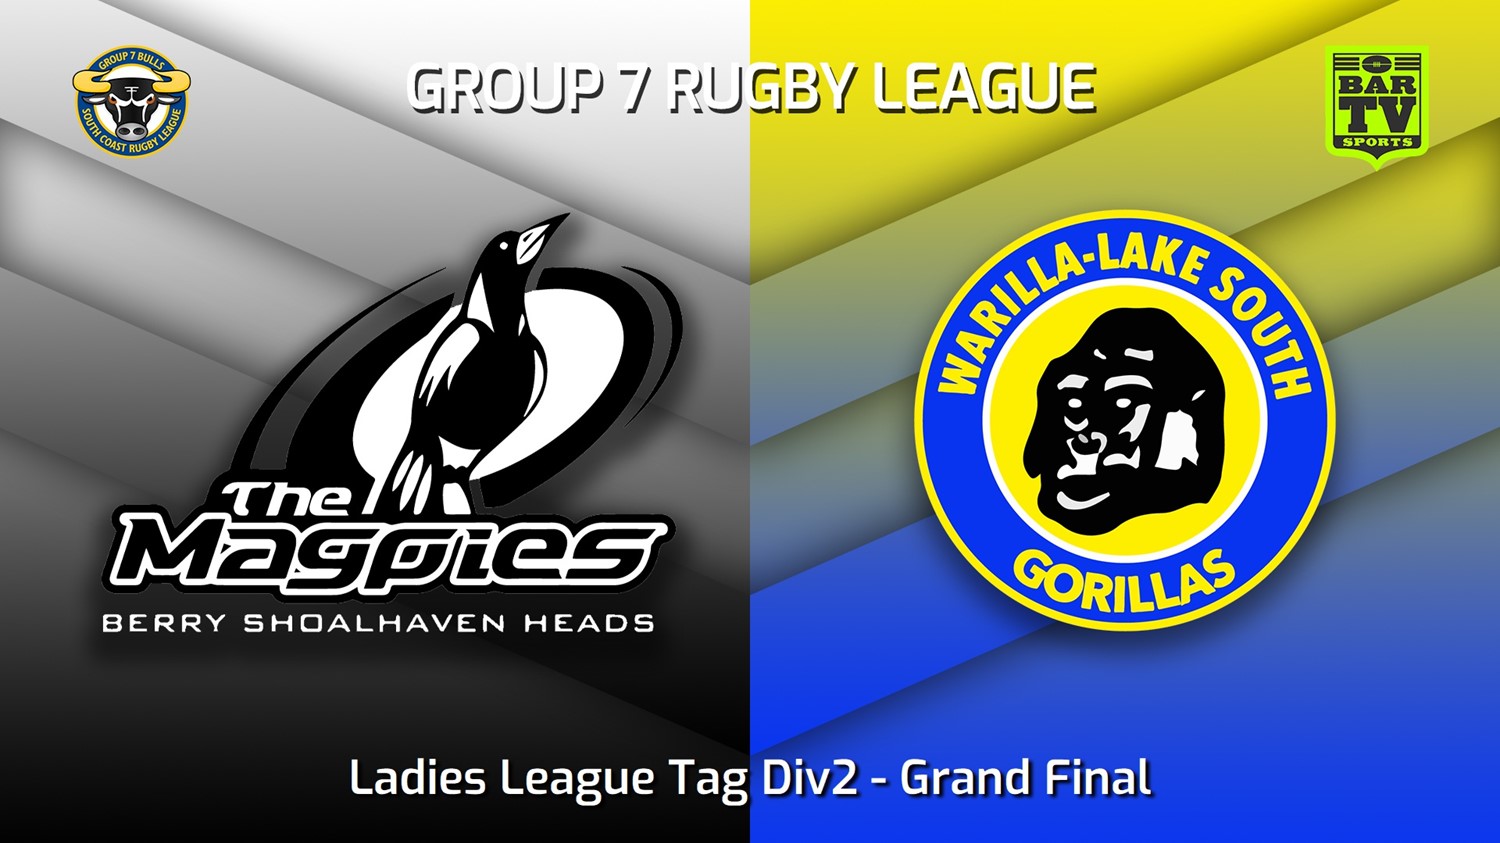 230910-South Coast Grand Final - Ladies League Tag Div2 - Berry-Shoalhaven Heads Magpies v Warilla-Lake South Gorillas Slate Image